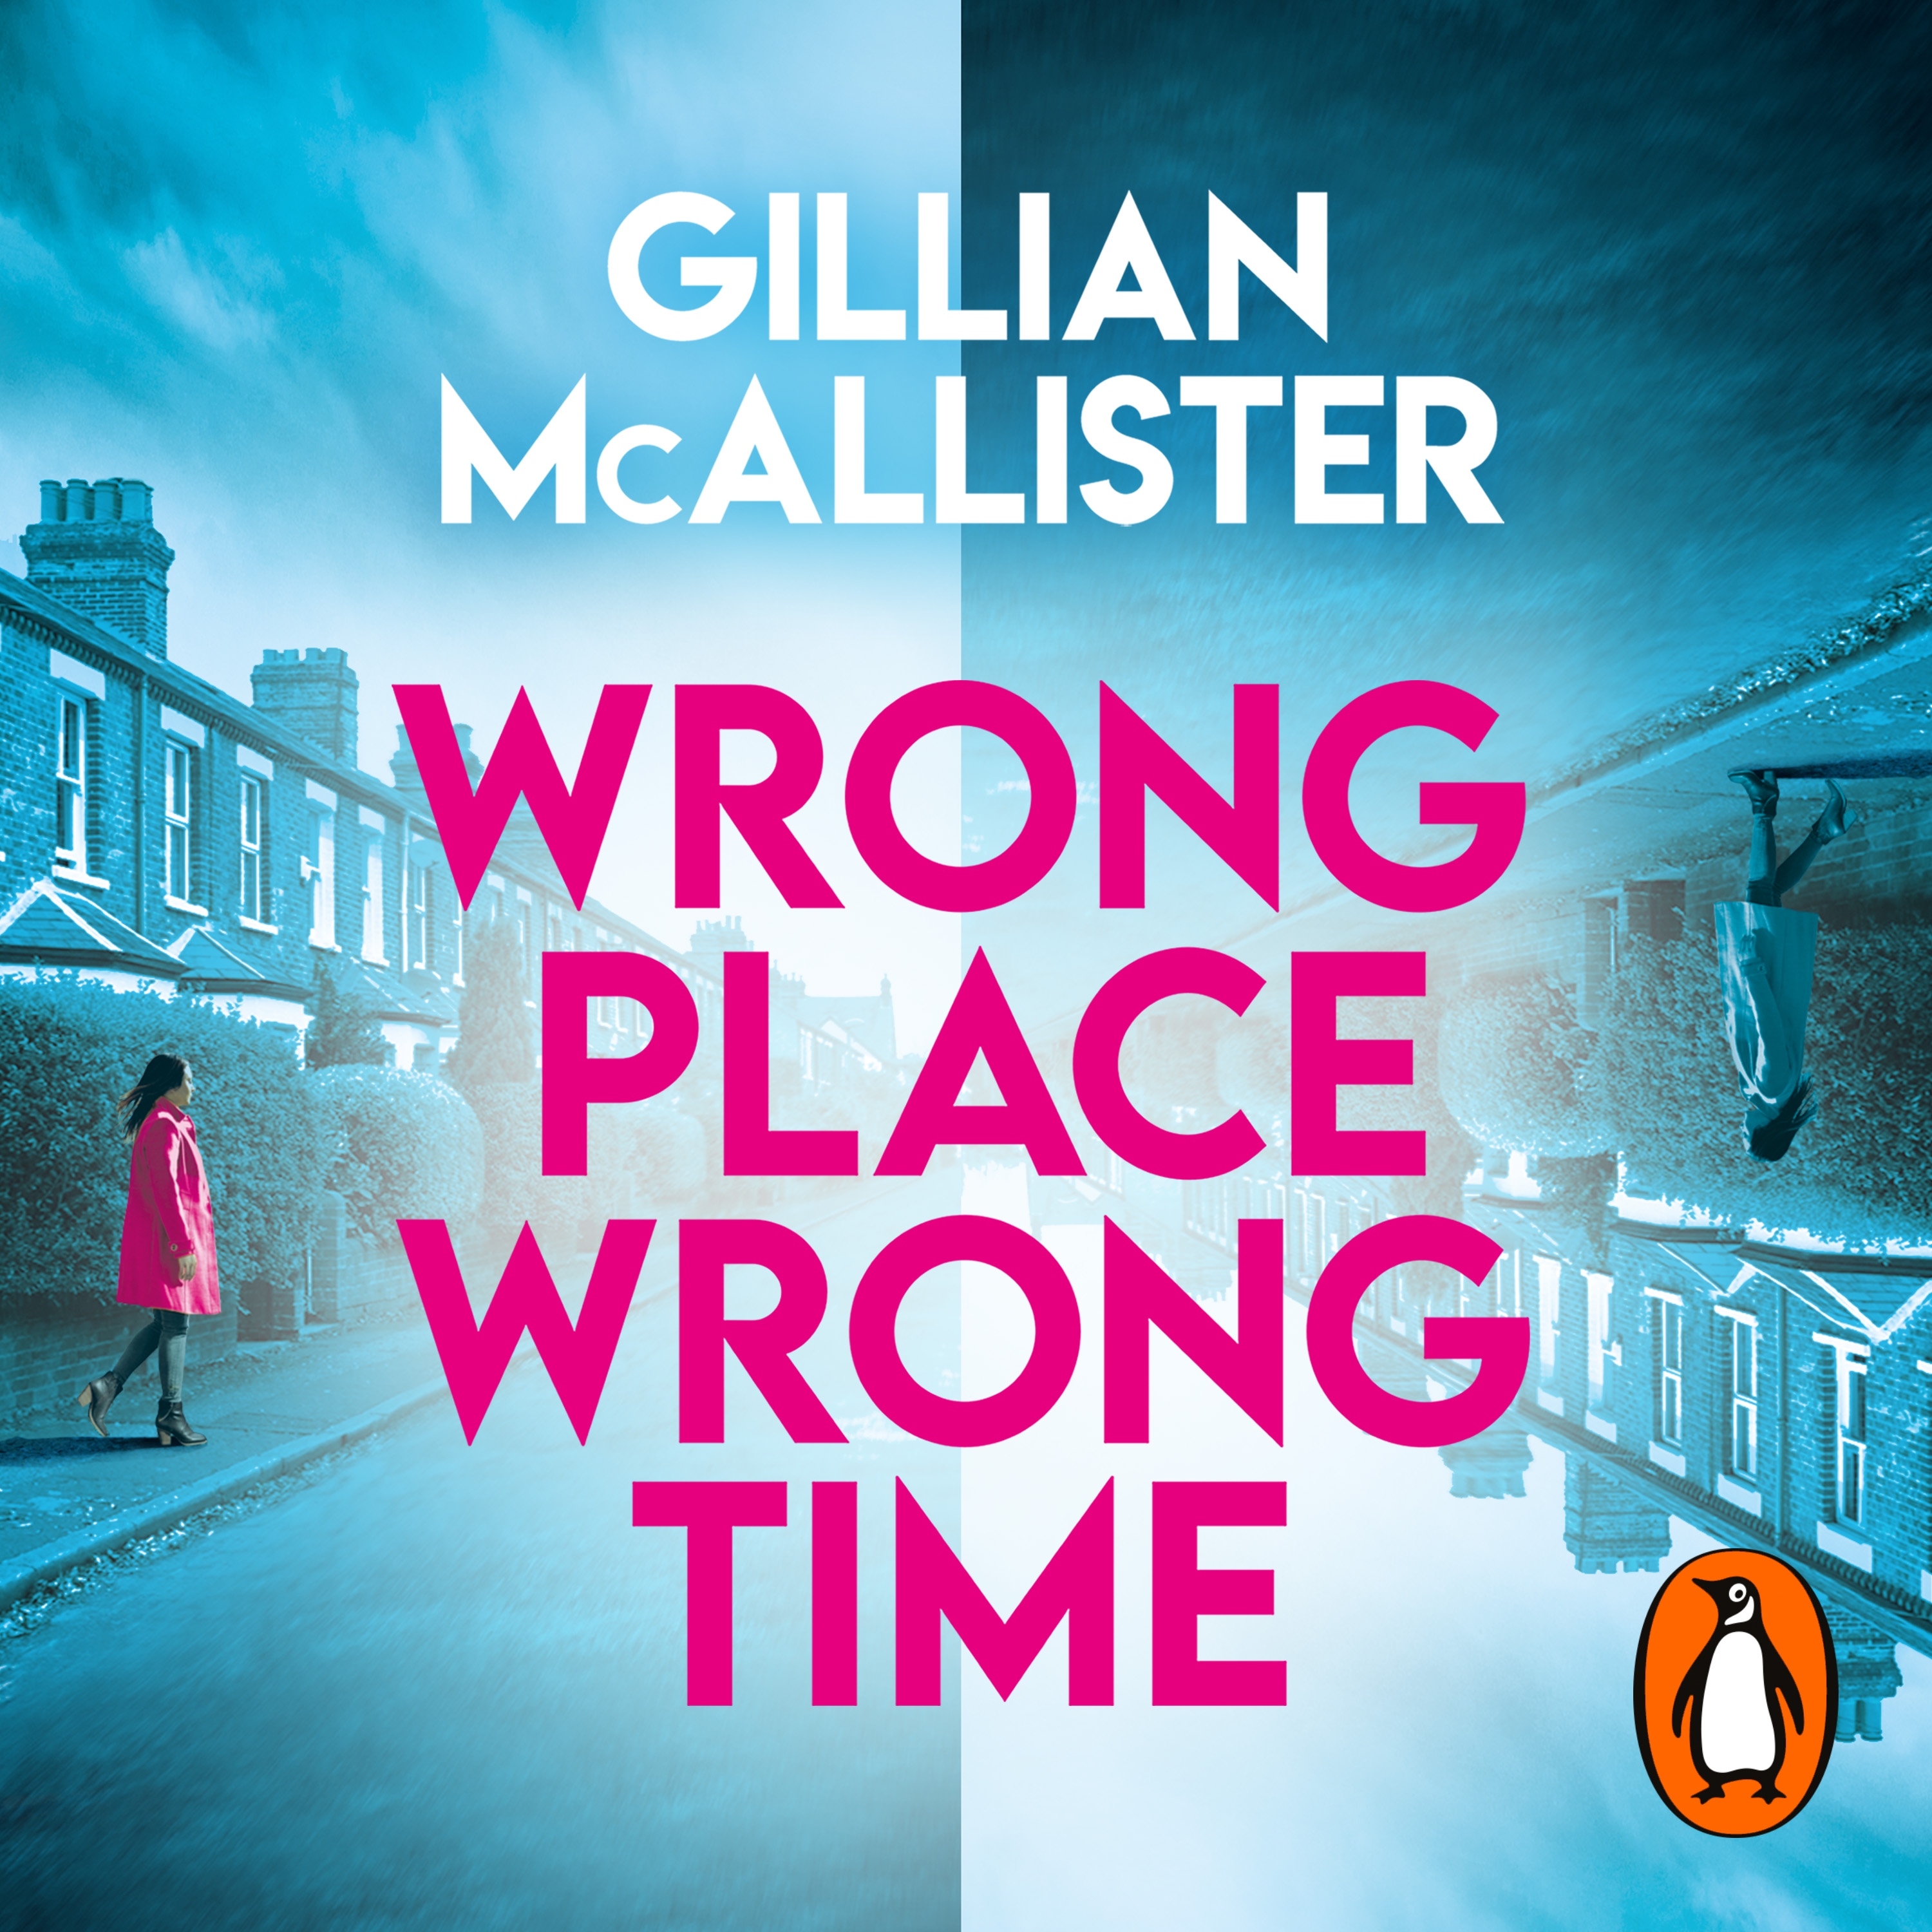 The cover of Wrong Place Wrong Time by Gillian McAllister. On the left side is a woman with a pink coat walking down a street with terraced houses. On the right side is the same image, but it's upside down and shaded in darker, more sinister tones. The author's name is at the top in white, and in the middle is the title of the book in pink. 